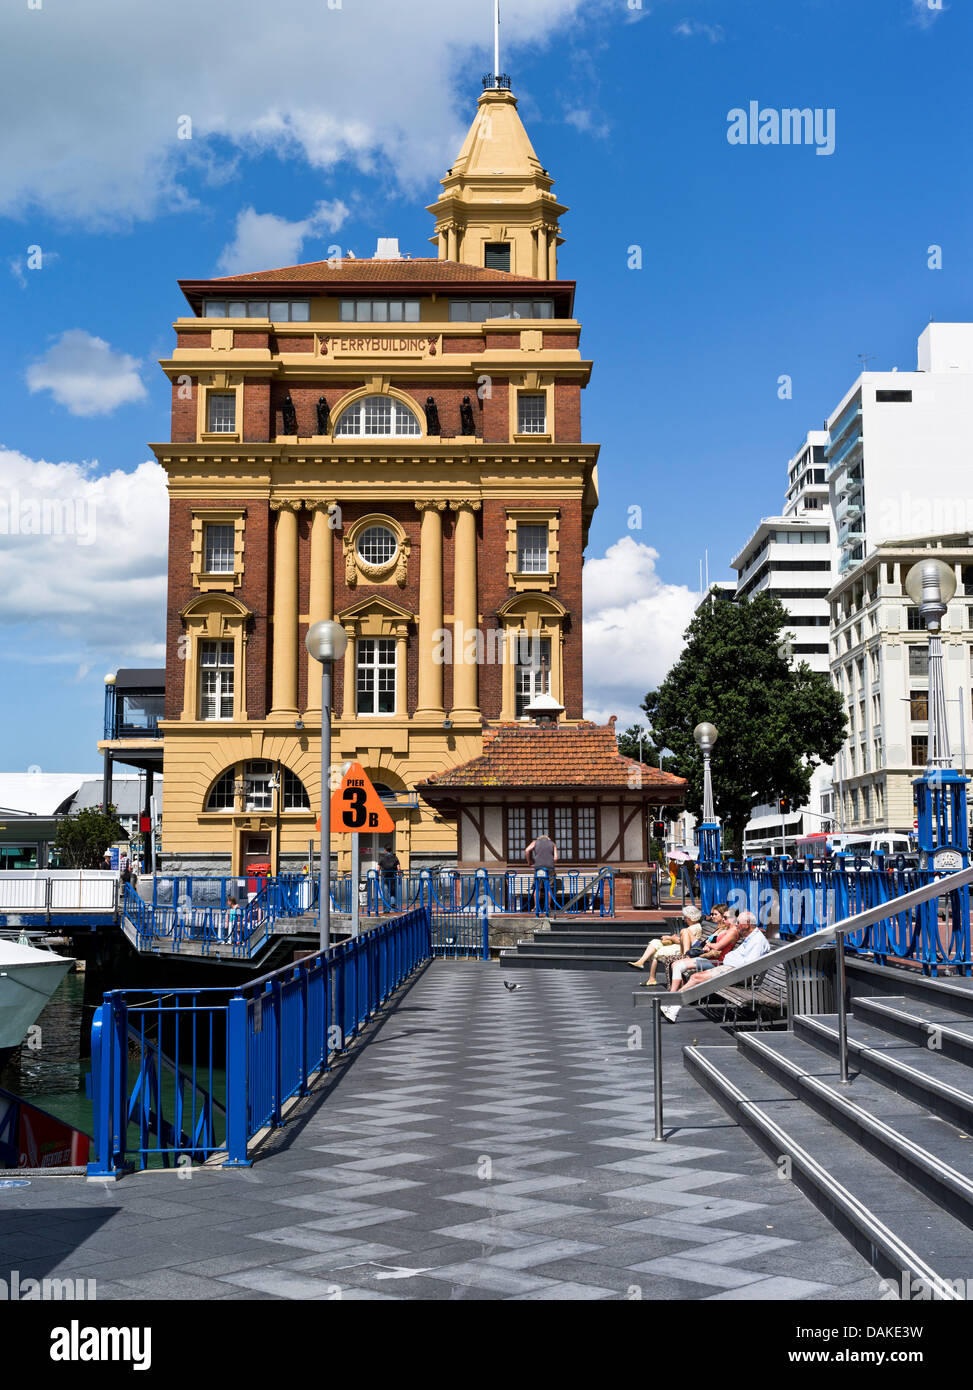 dh Ferry terminal building AUCKLAND HARBOUR NEW ZEALAND NZ Pier people sitting relaxing waterfront Stock Photo